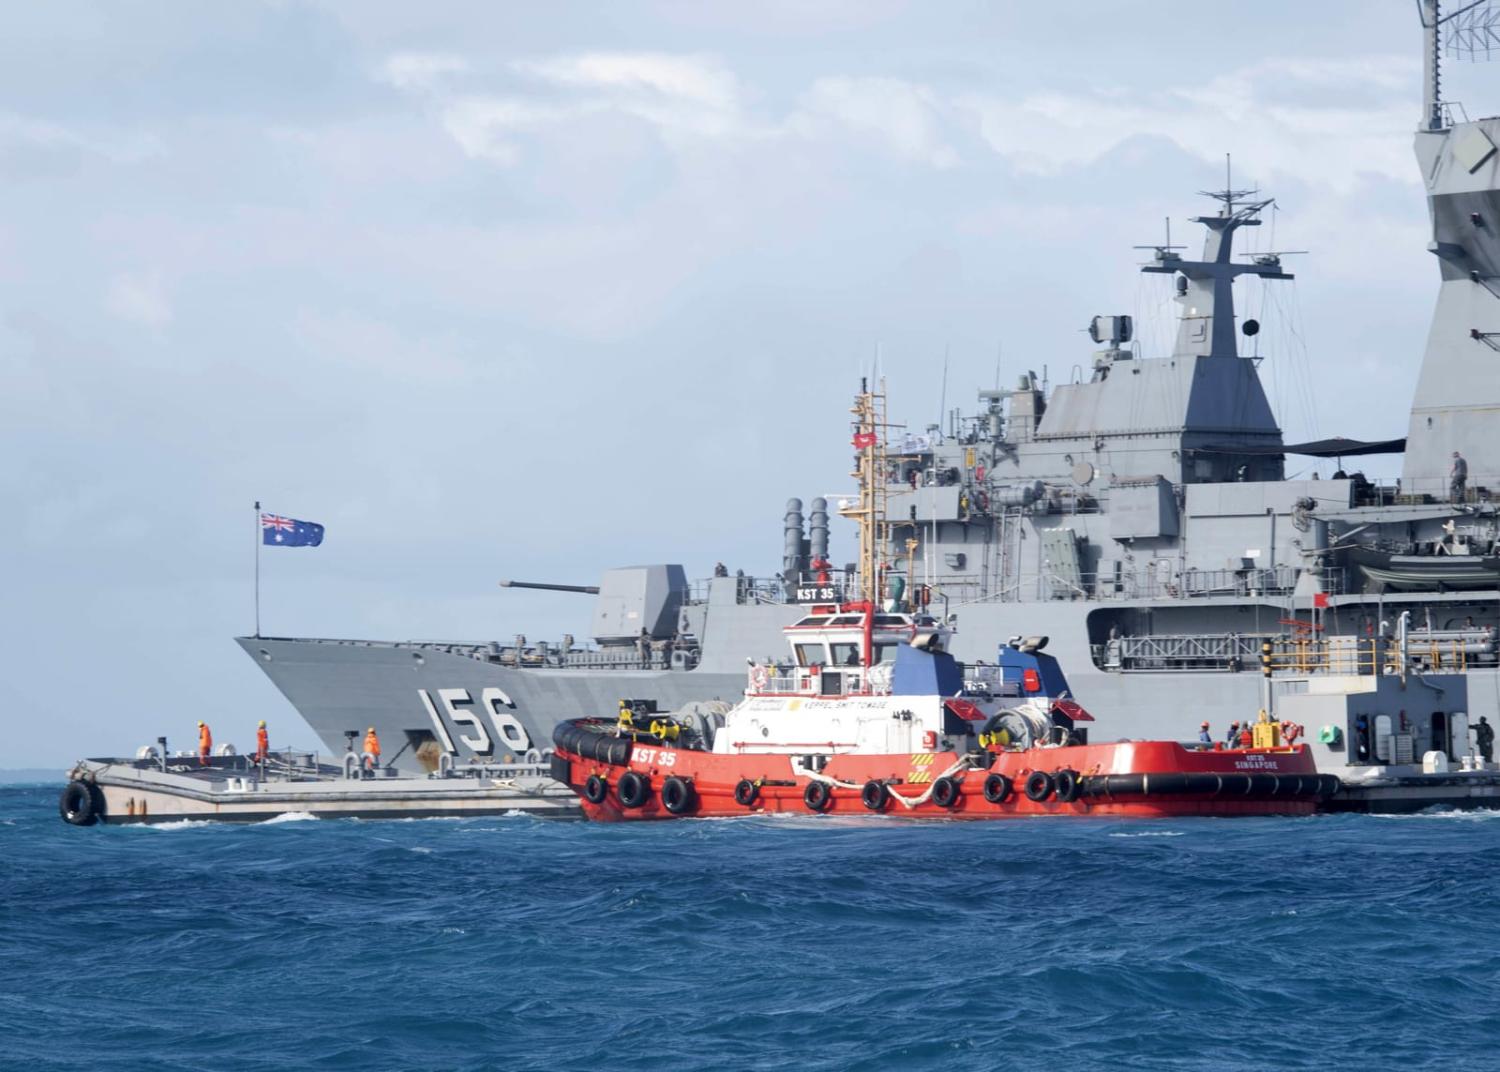 HMAS Toowoomba anchoring to refuel at the US base on Diego Garcia in June 2020 (Carlos W. Hopper/US Navy)